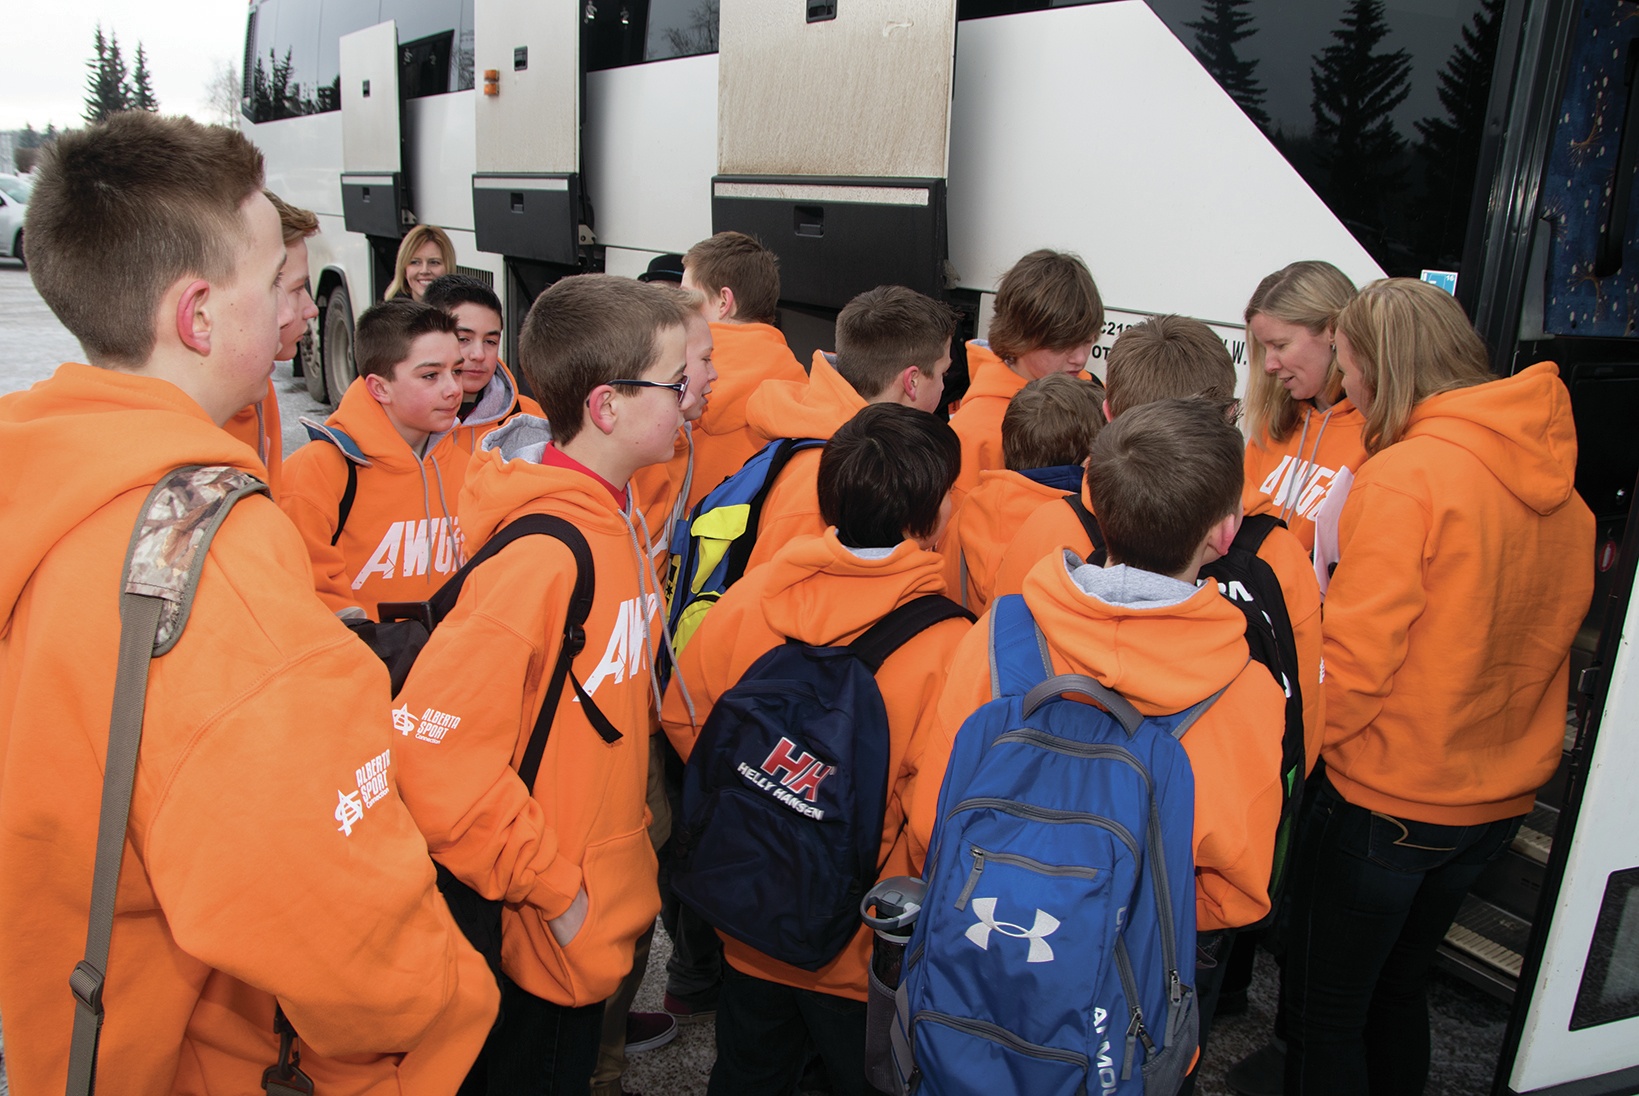 GAME TIME - A group of athletes eagerly awaited their turn to board a charter bus to the 2016 Alberta Winter Games